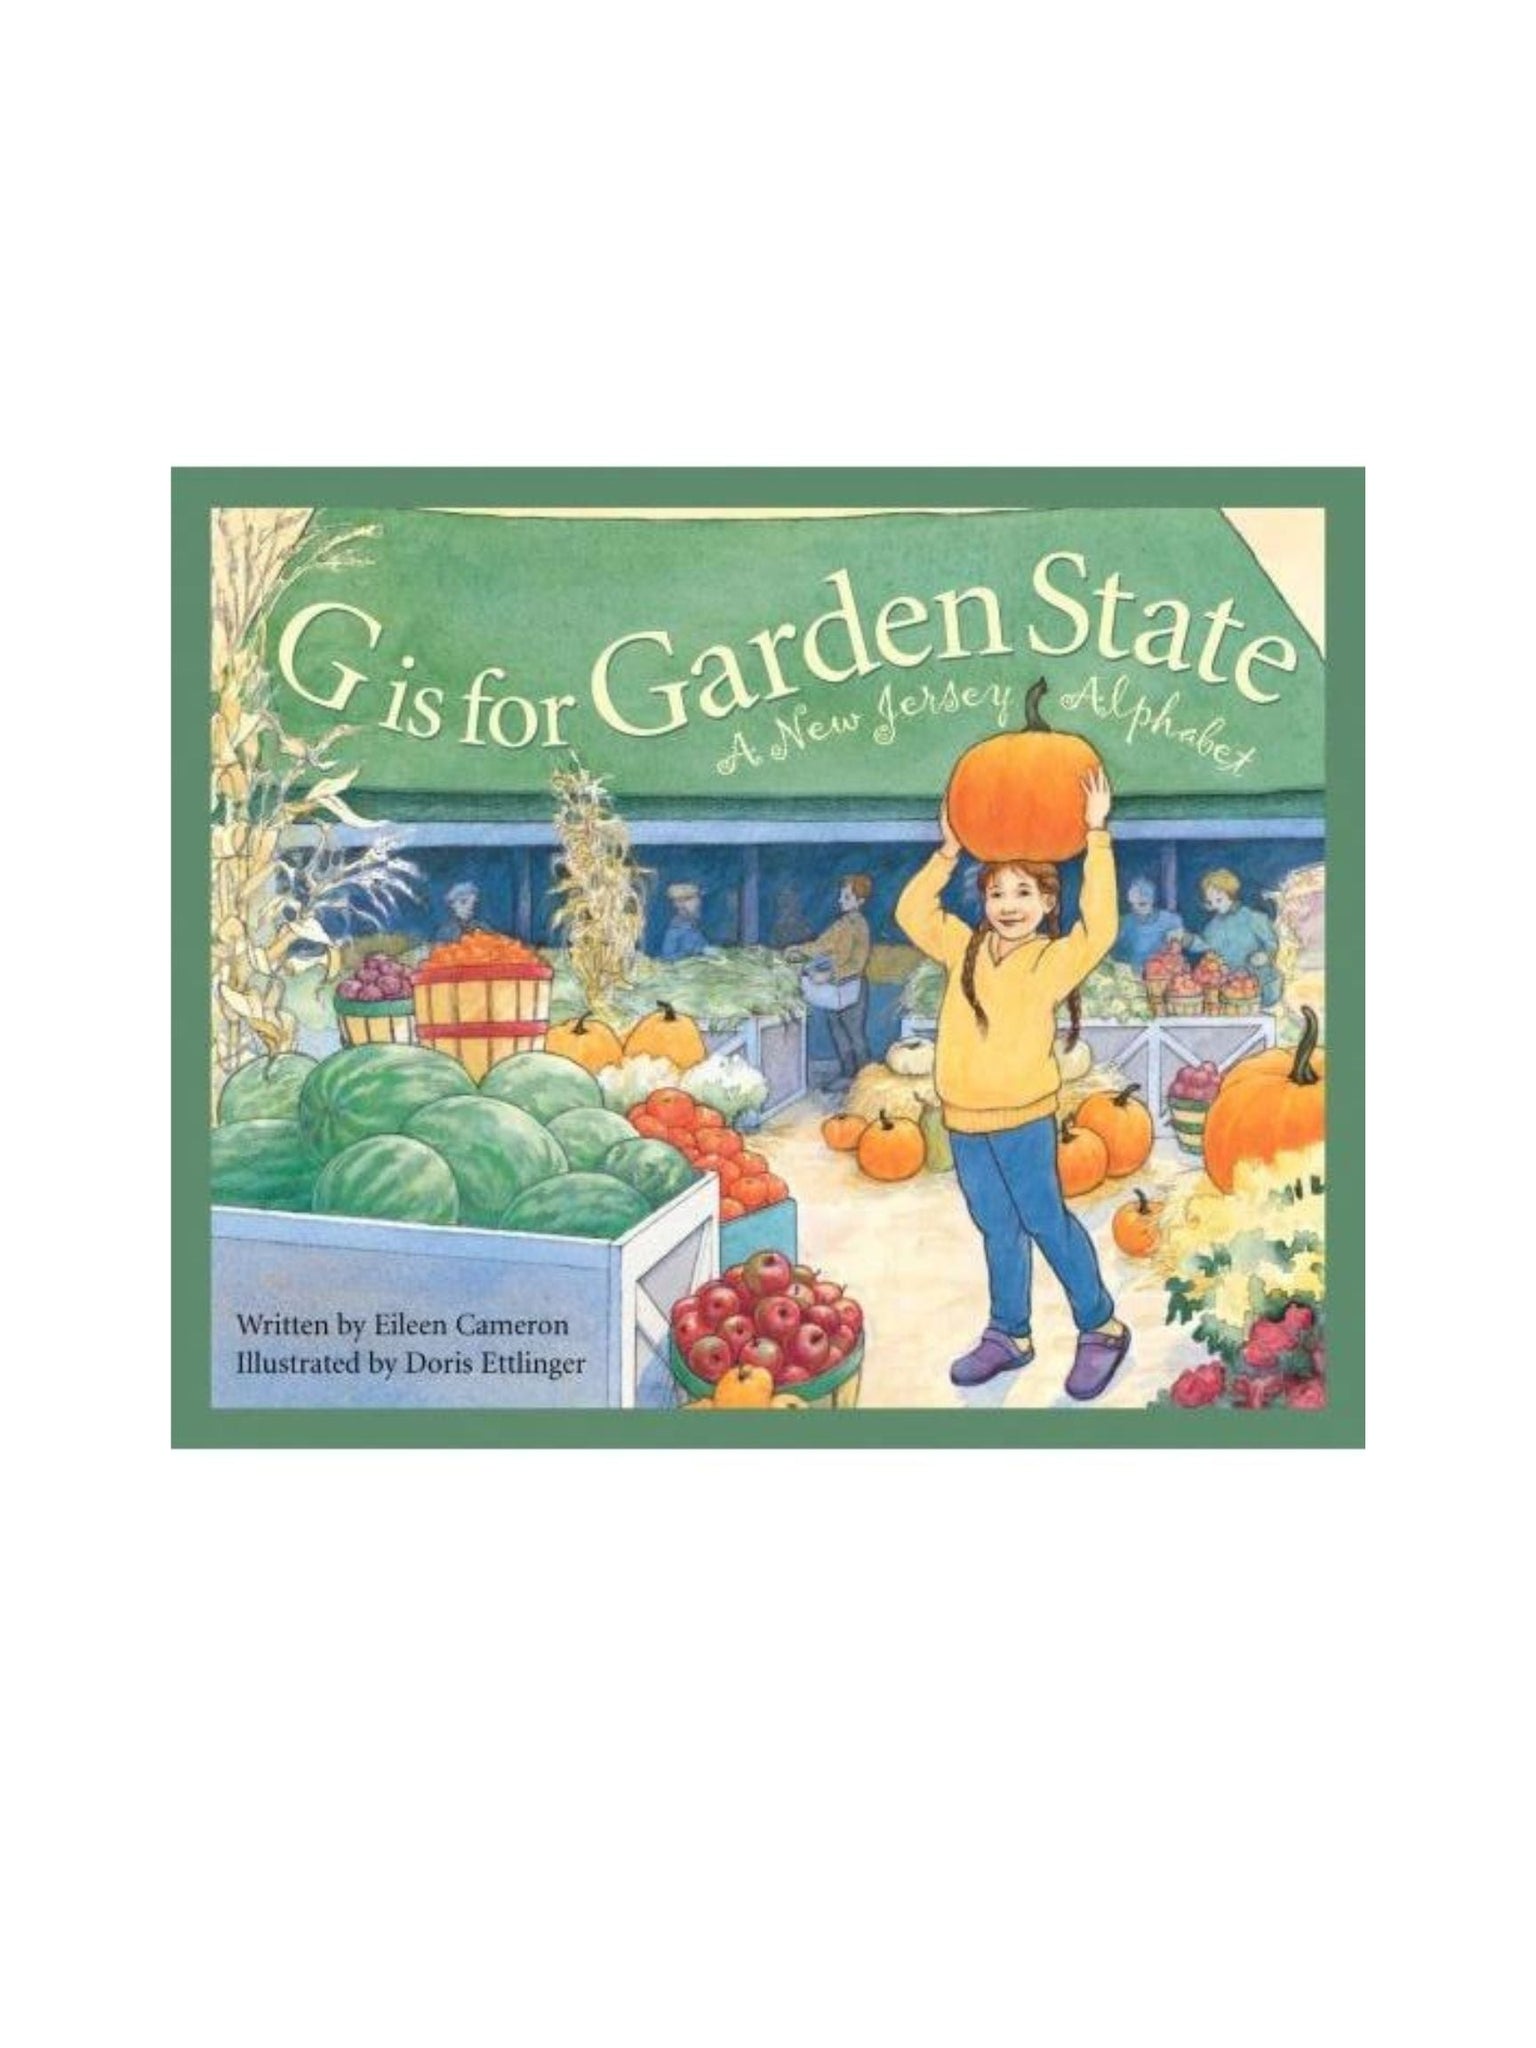 g is for garden state book